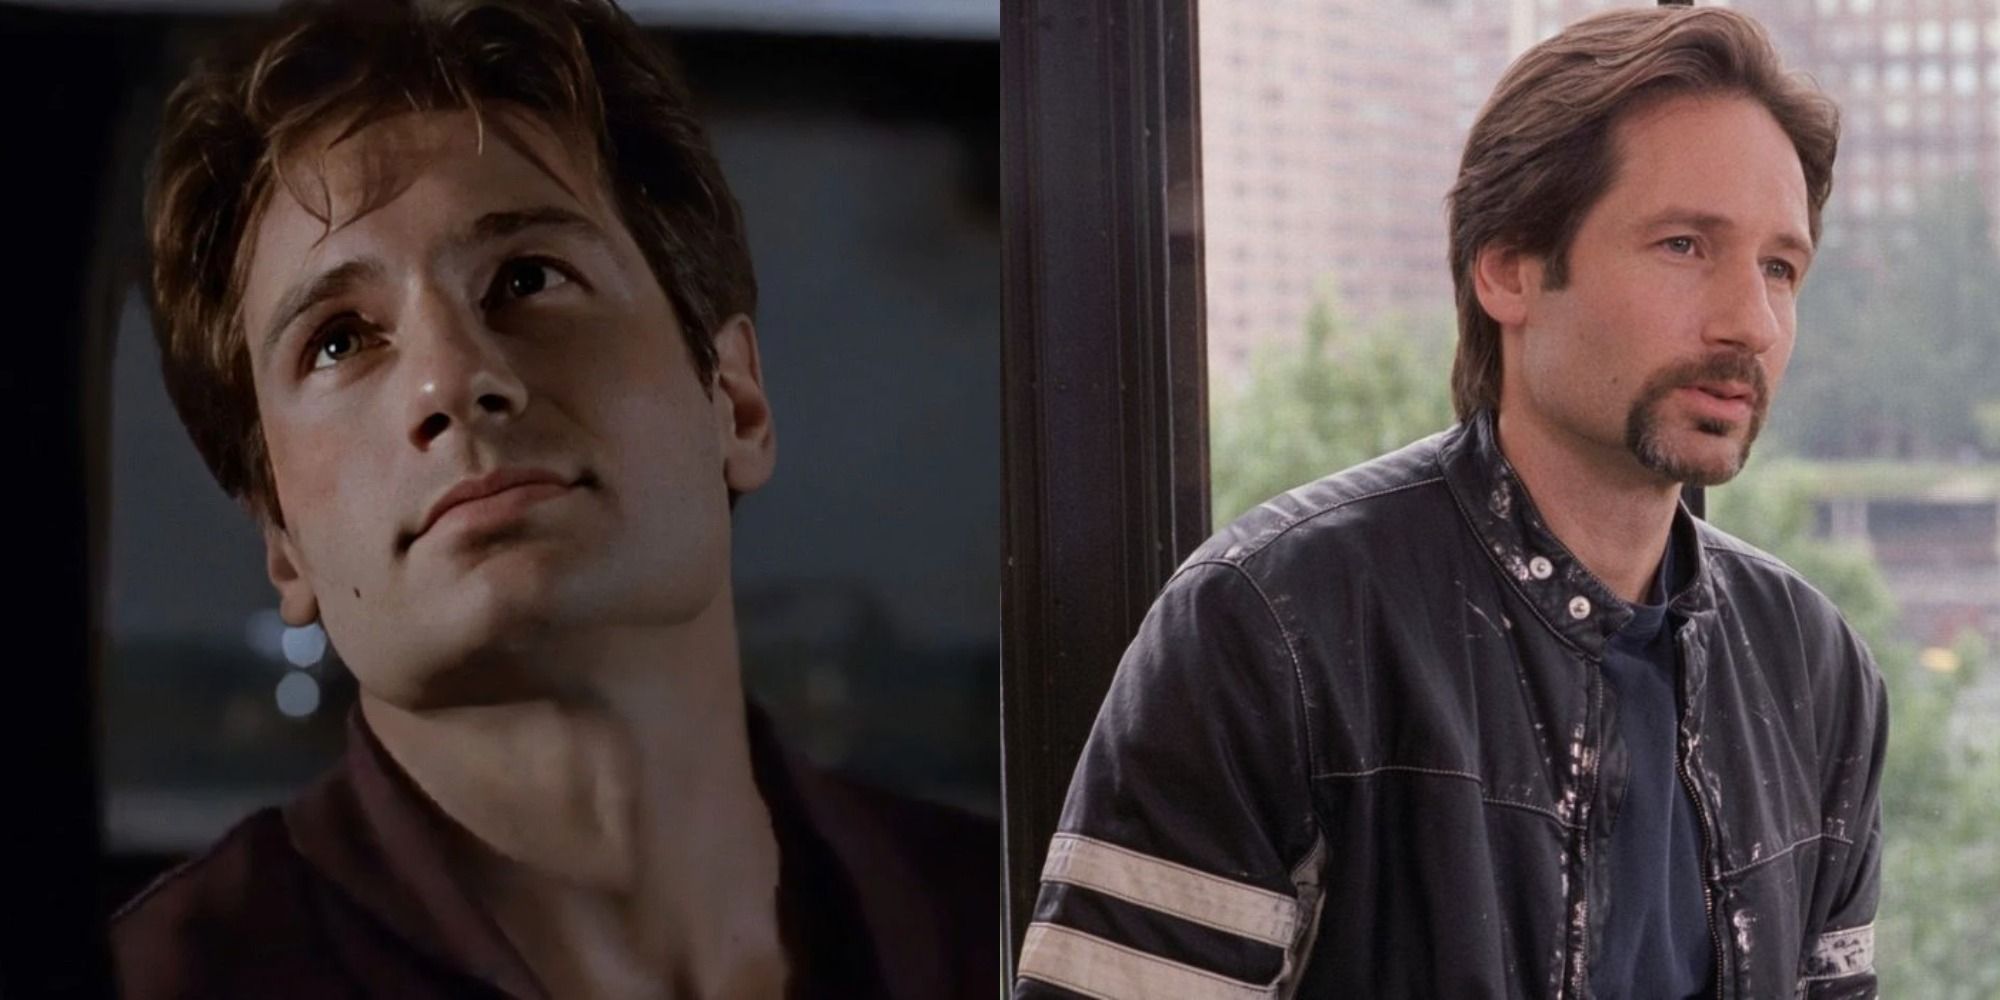 Split image showing David Duchovny in The X-Files and House of D.